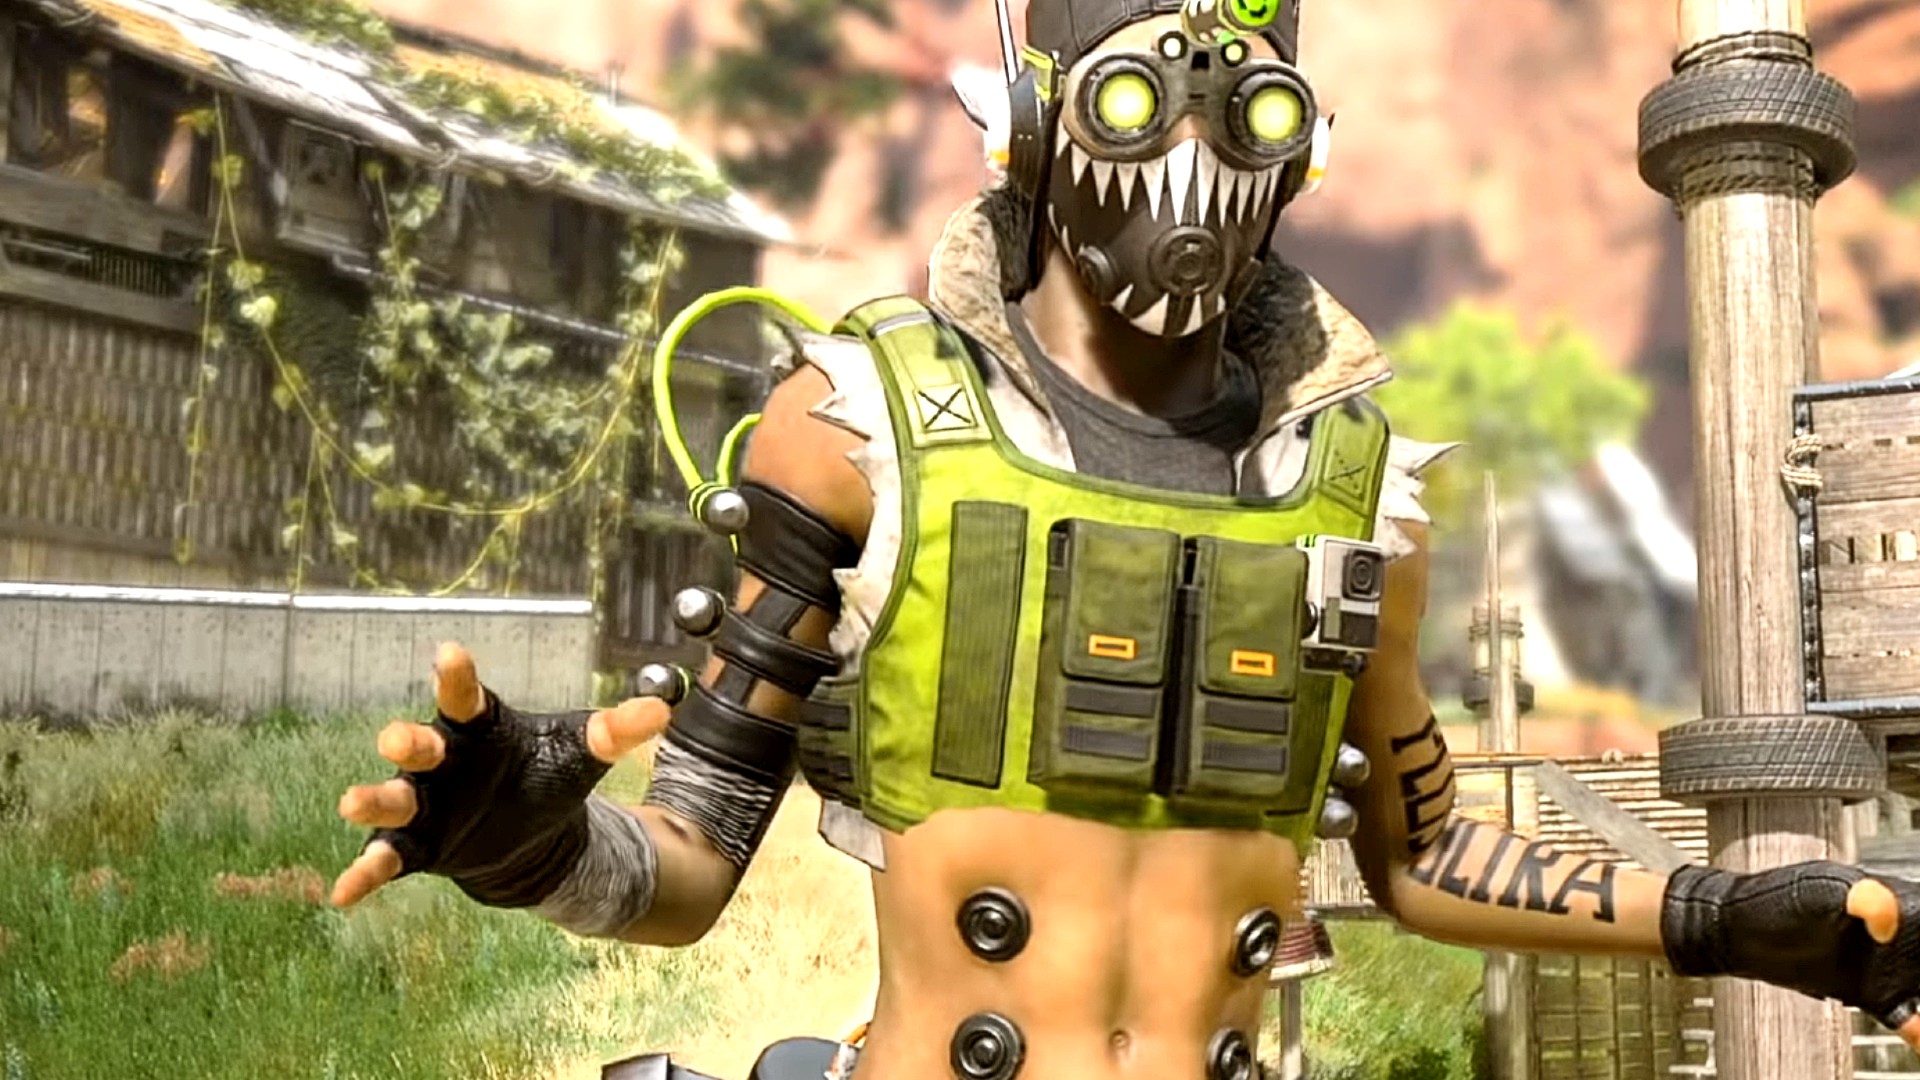 Octane, one of the best characters in Apex Legends